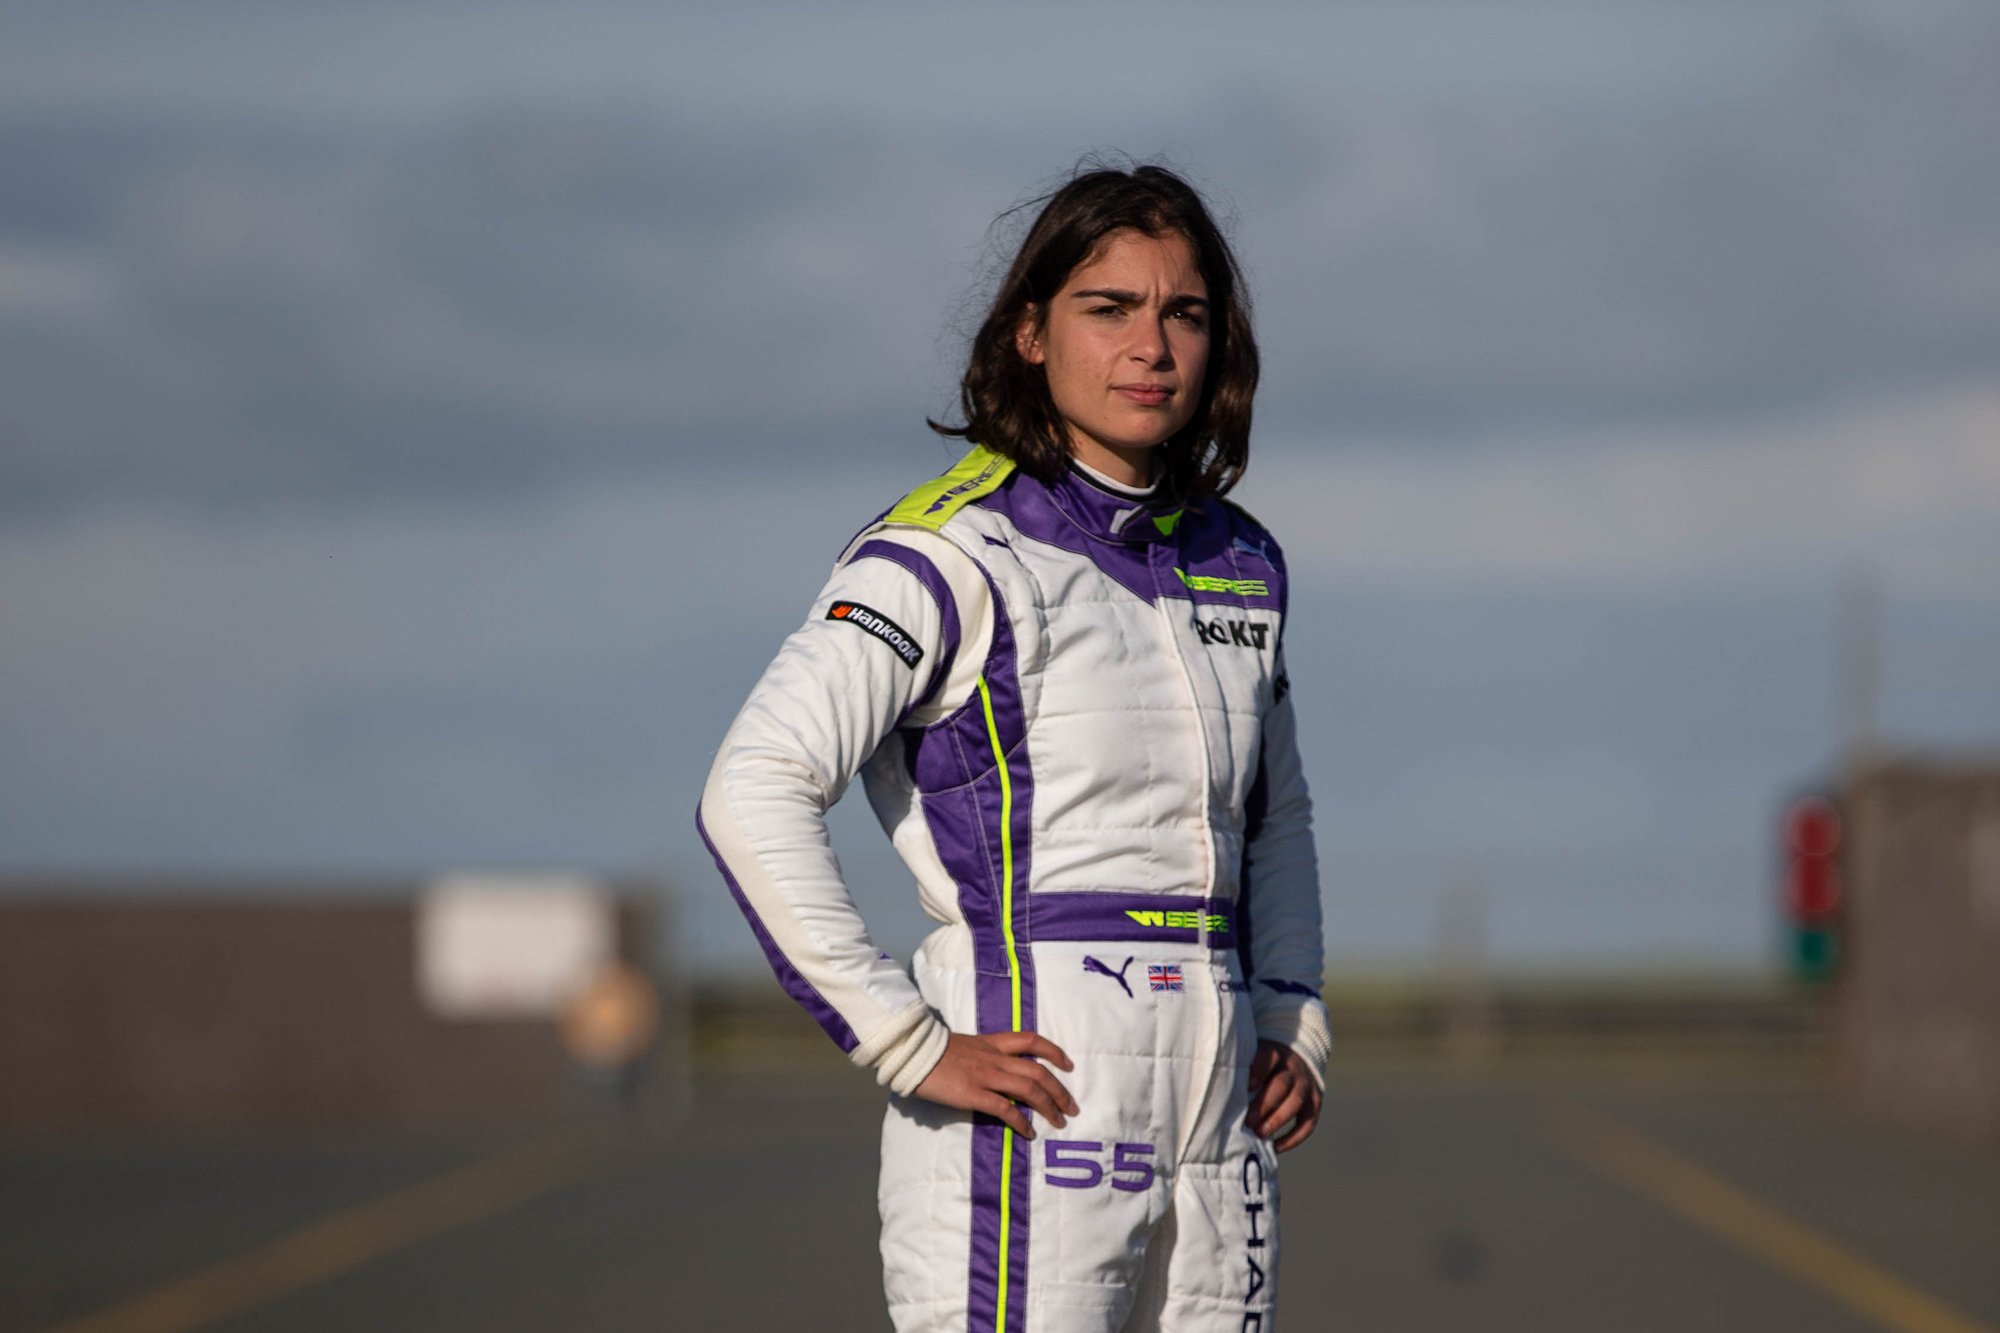 Jamie Chadwick wearing the Puma Motorsport racing suits for W Series